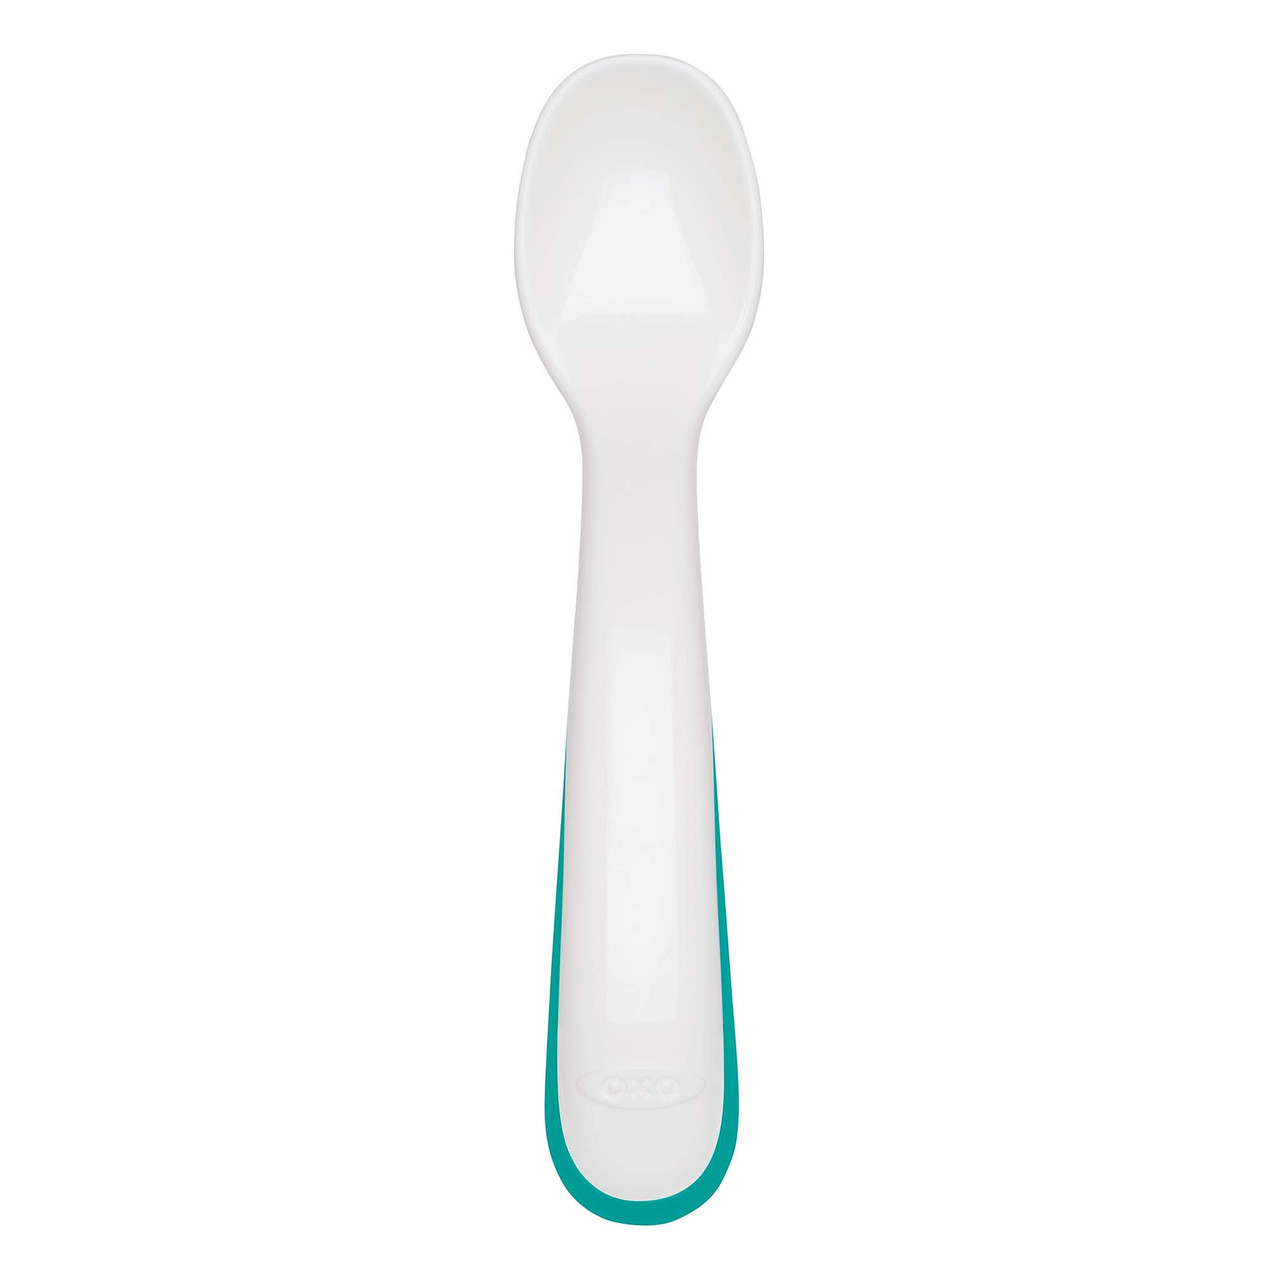 Tot Feeding Spoon with Soft Silicone - Teal - Gift and Gourmet